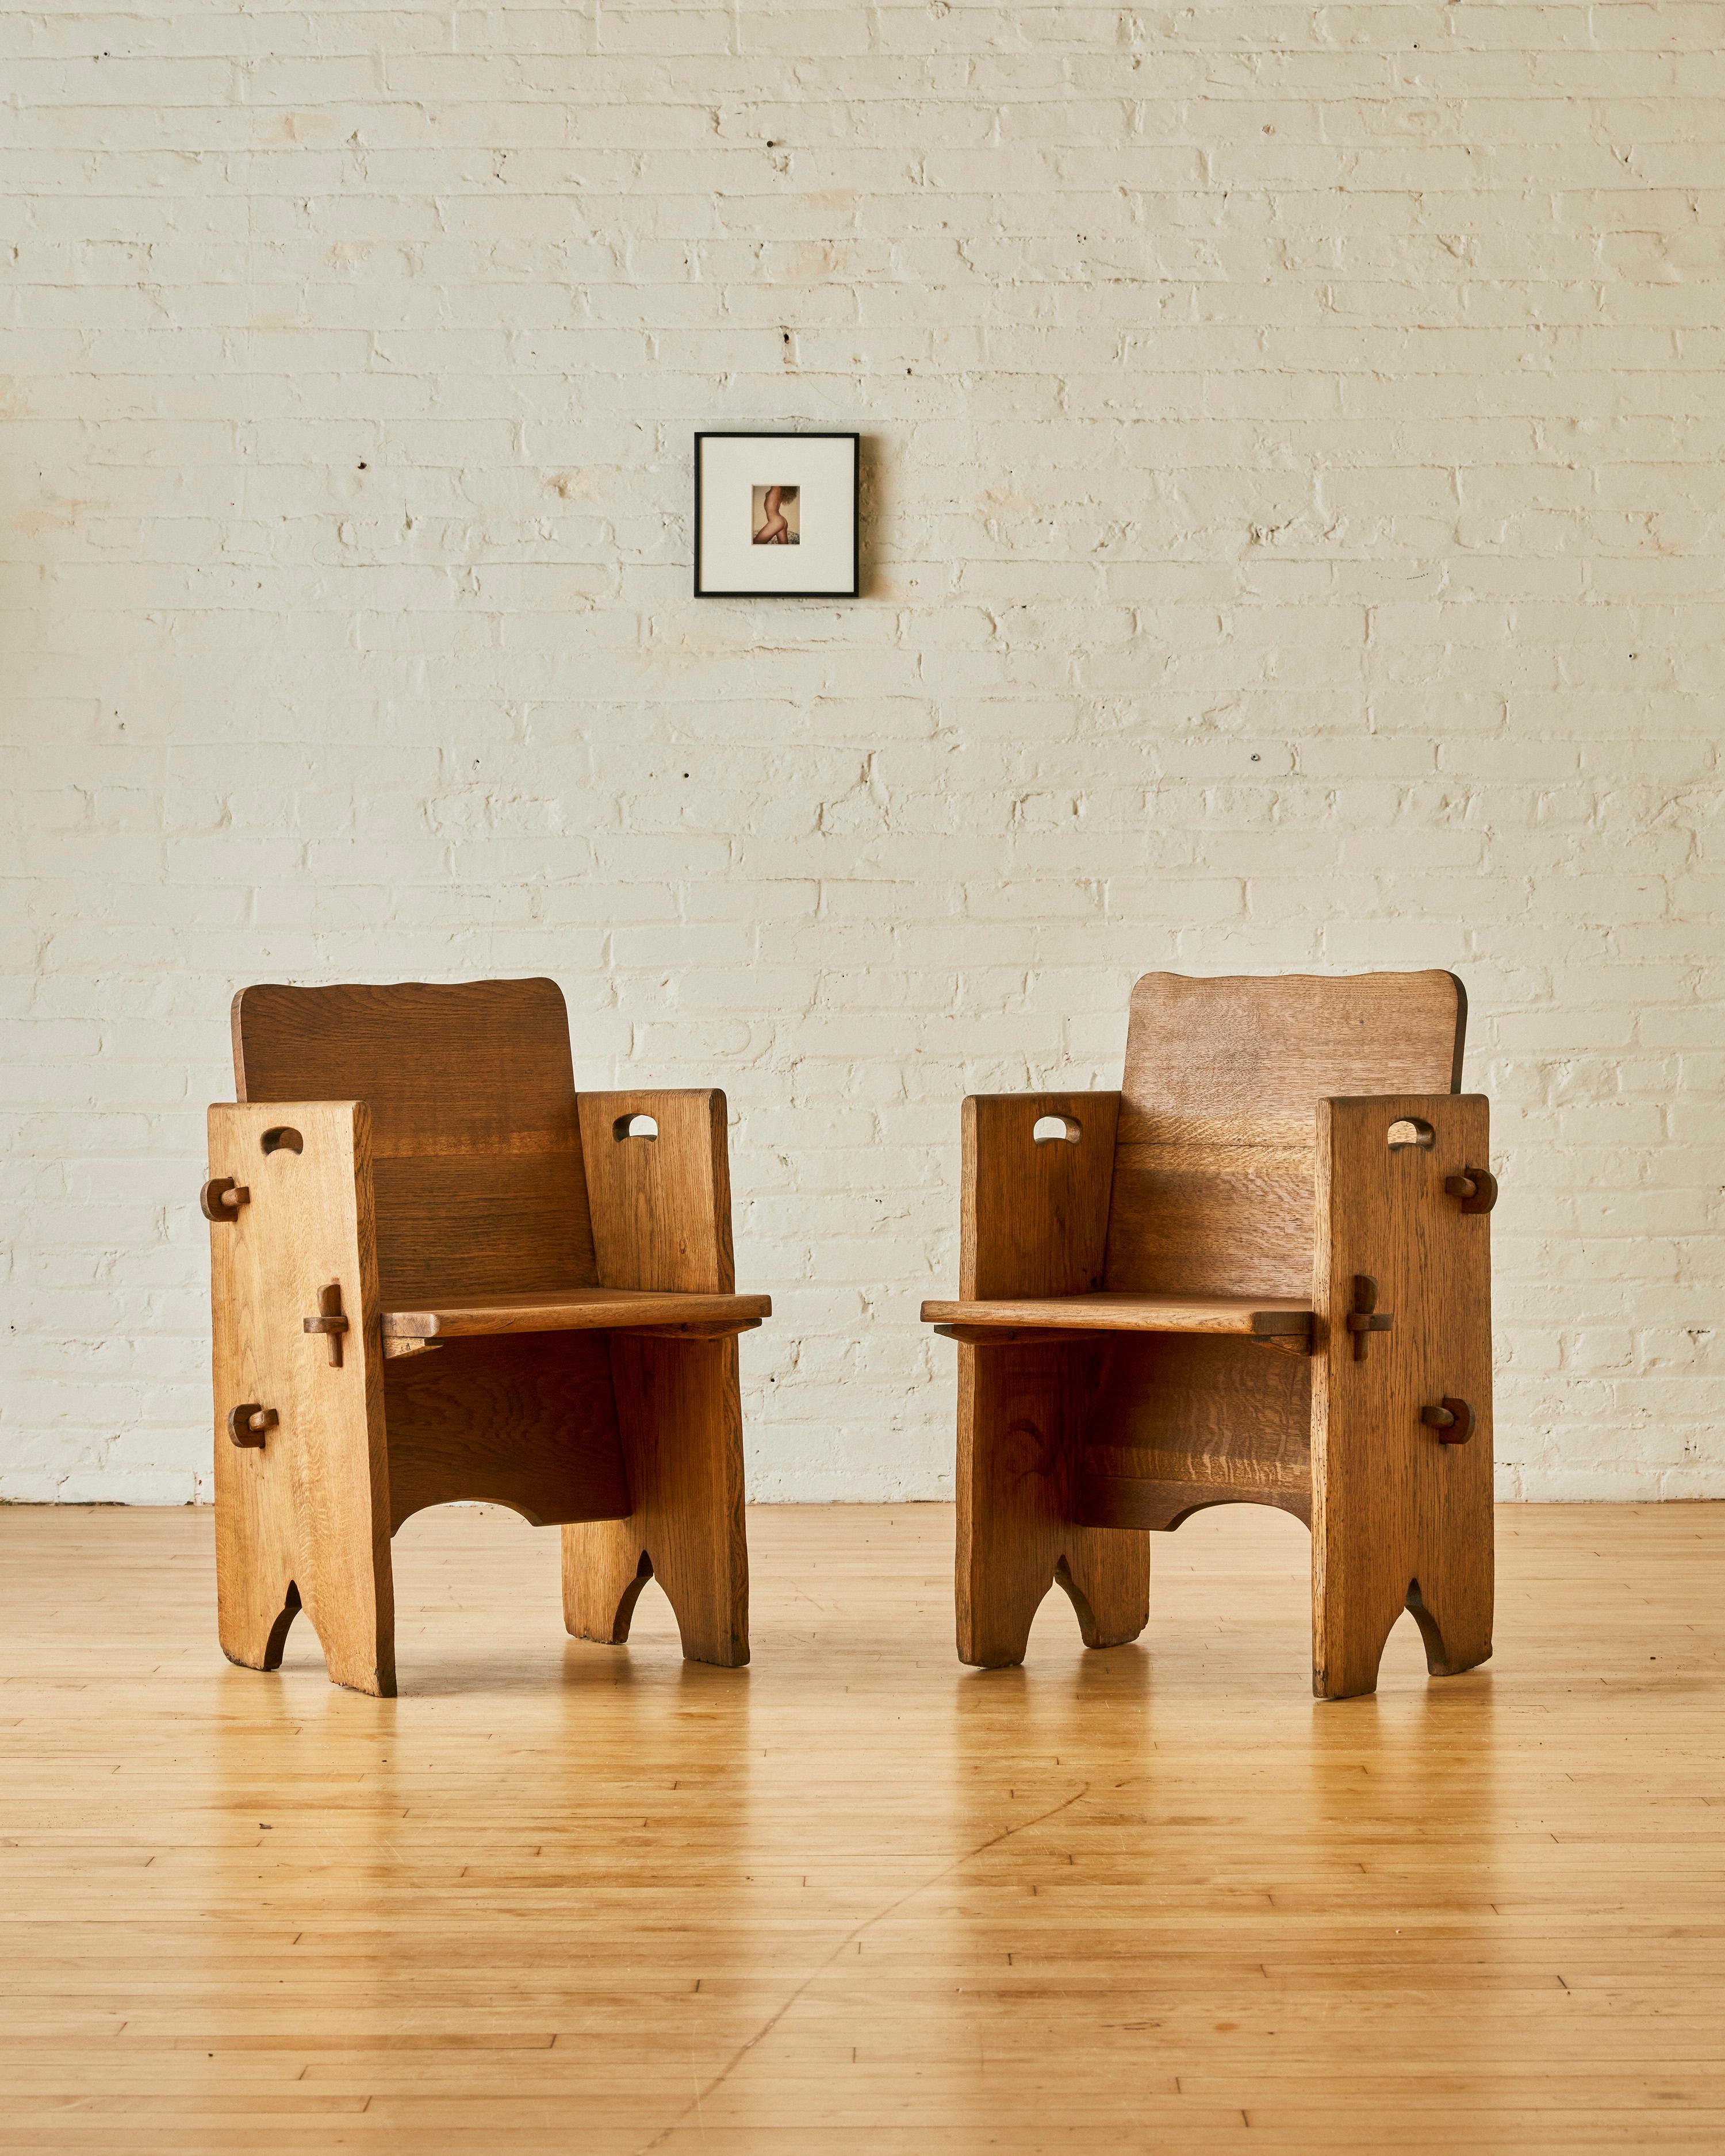 A Pair of British Scalloped Edge Oak Pegged Chairs. 

